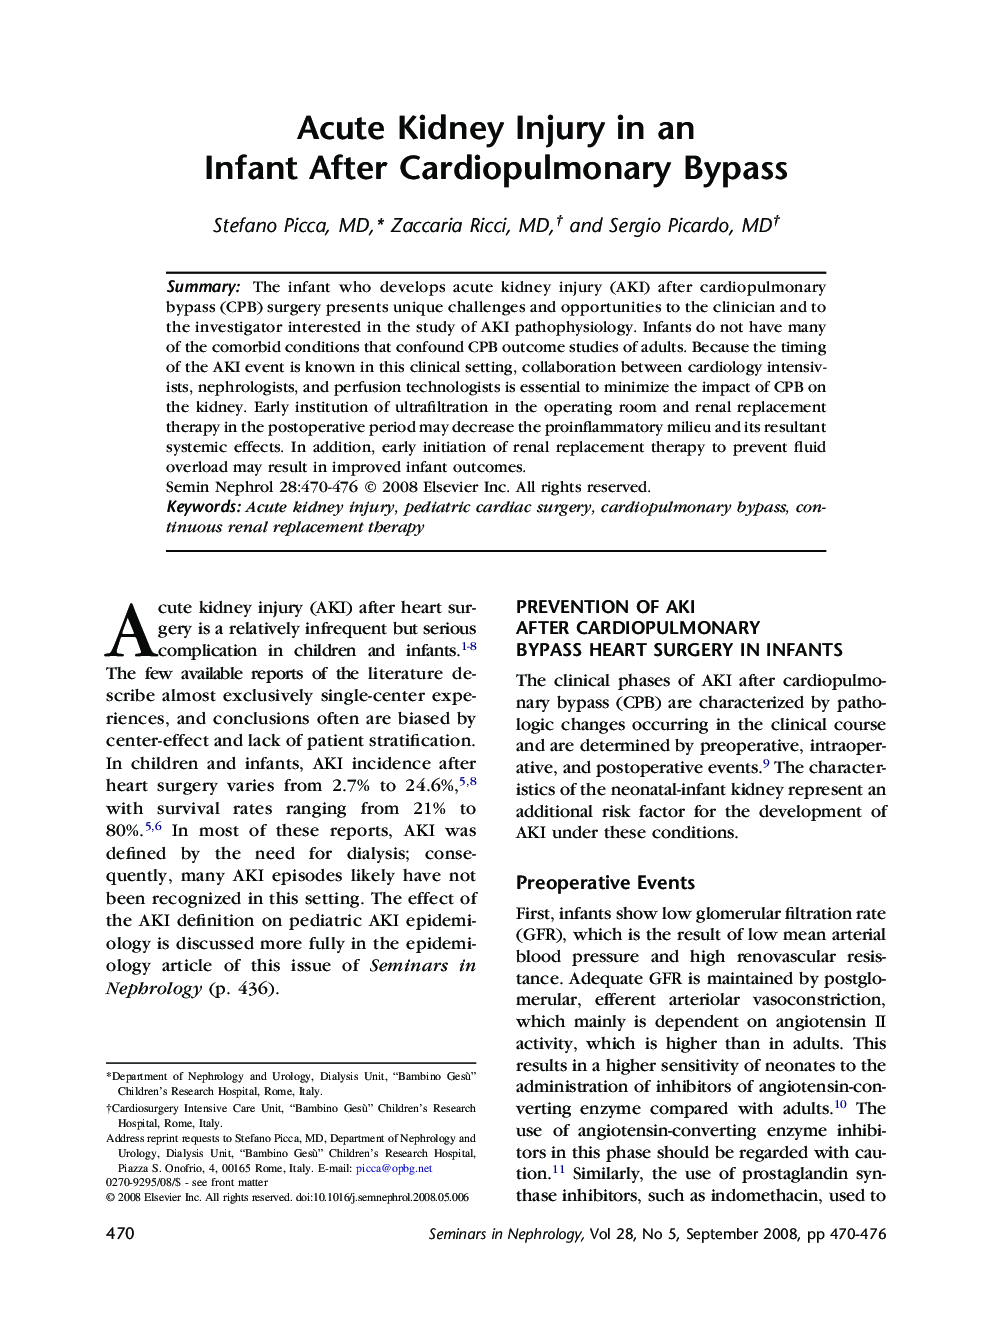 Acute Kidney Injury in an Infant After Cardiopulmonary Bypass